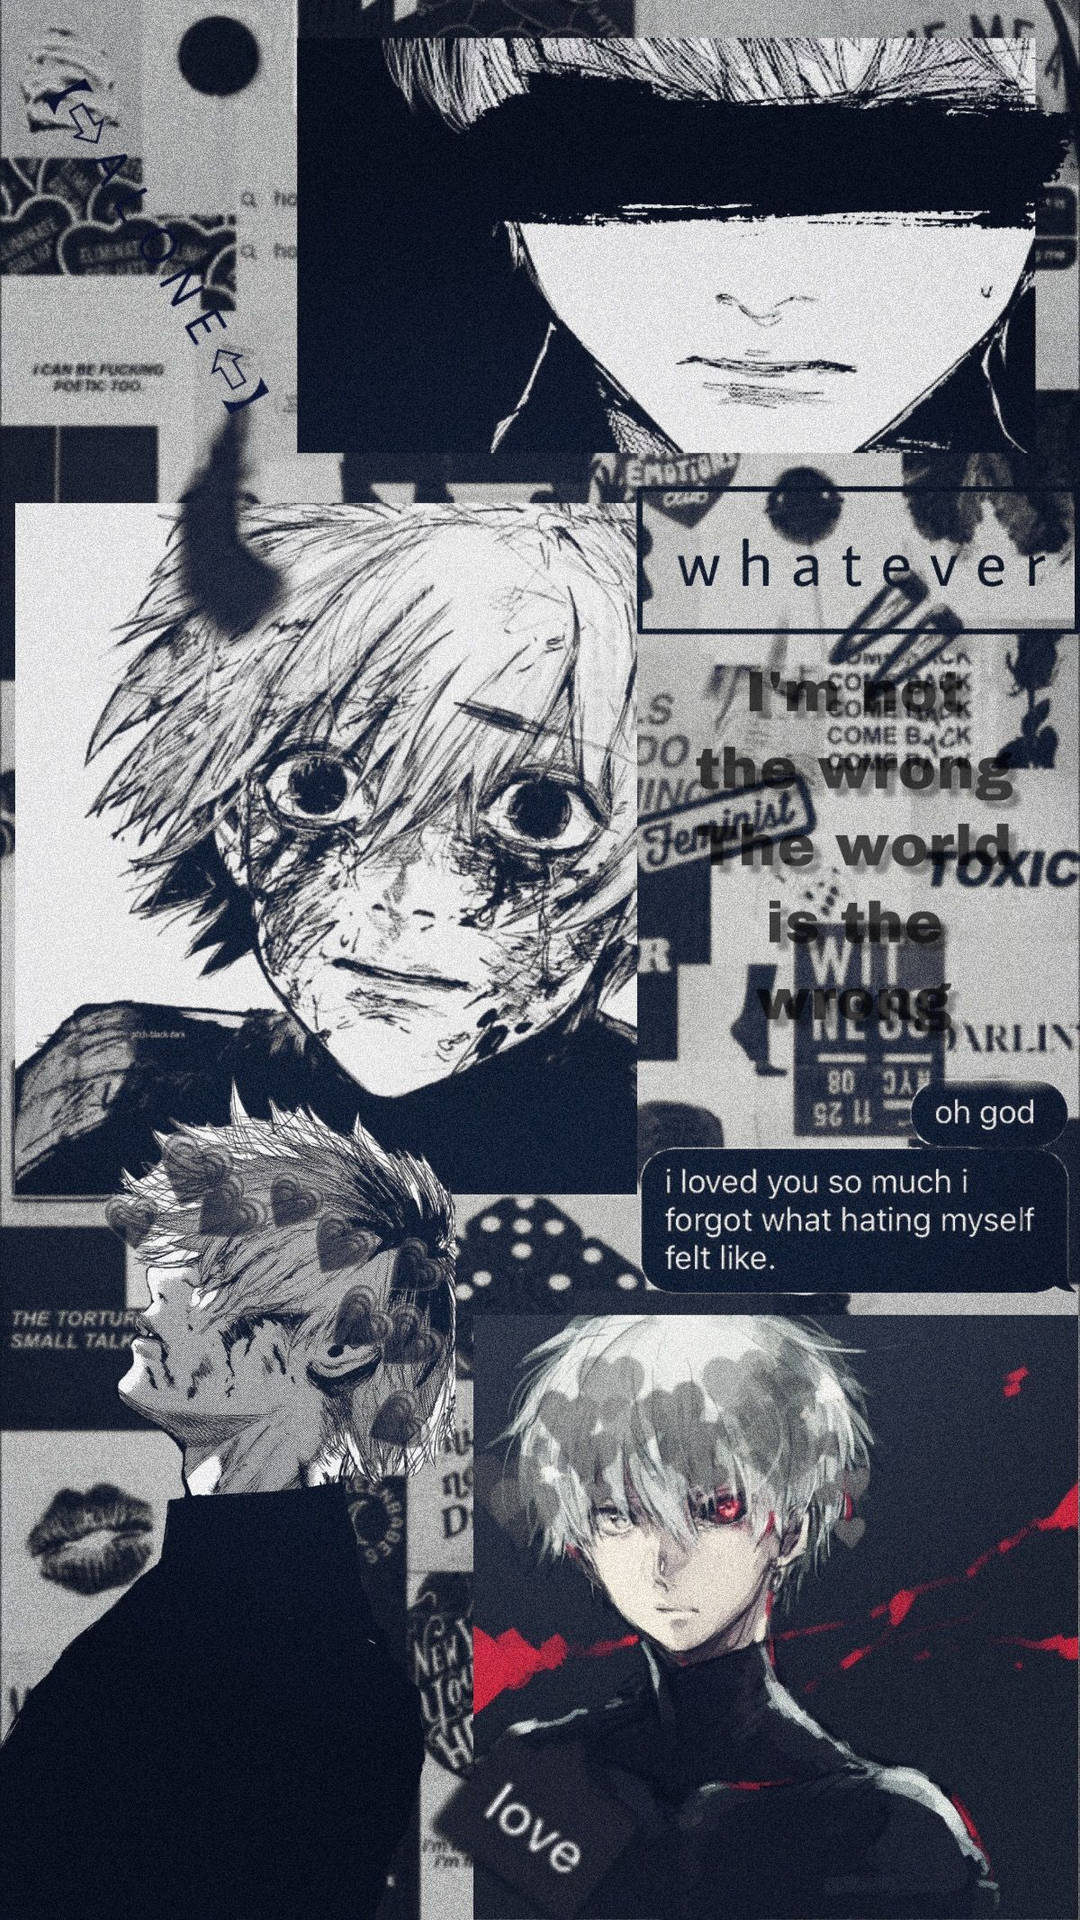 Take a journey through a Tokyo Ghoul Aesthetic Wallpaper